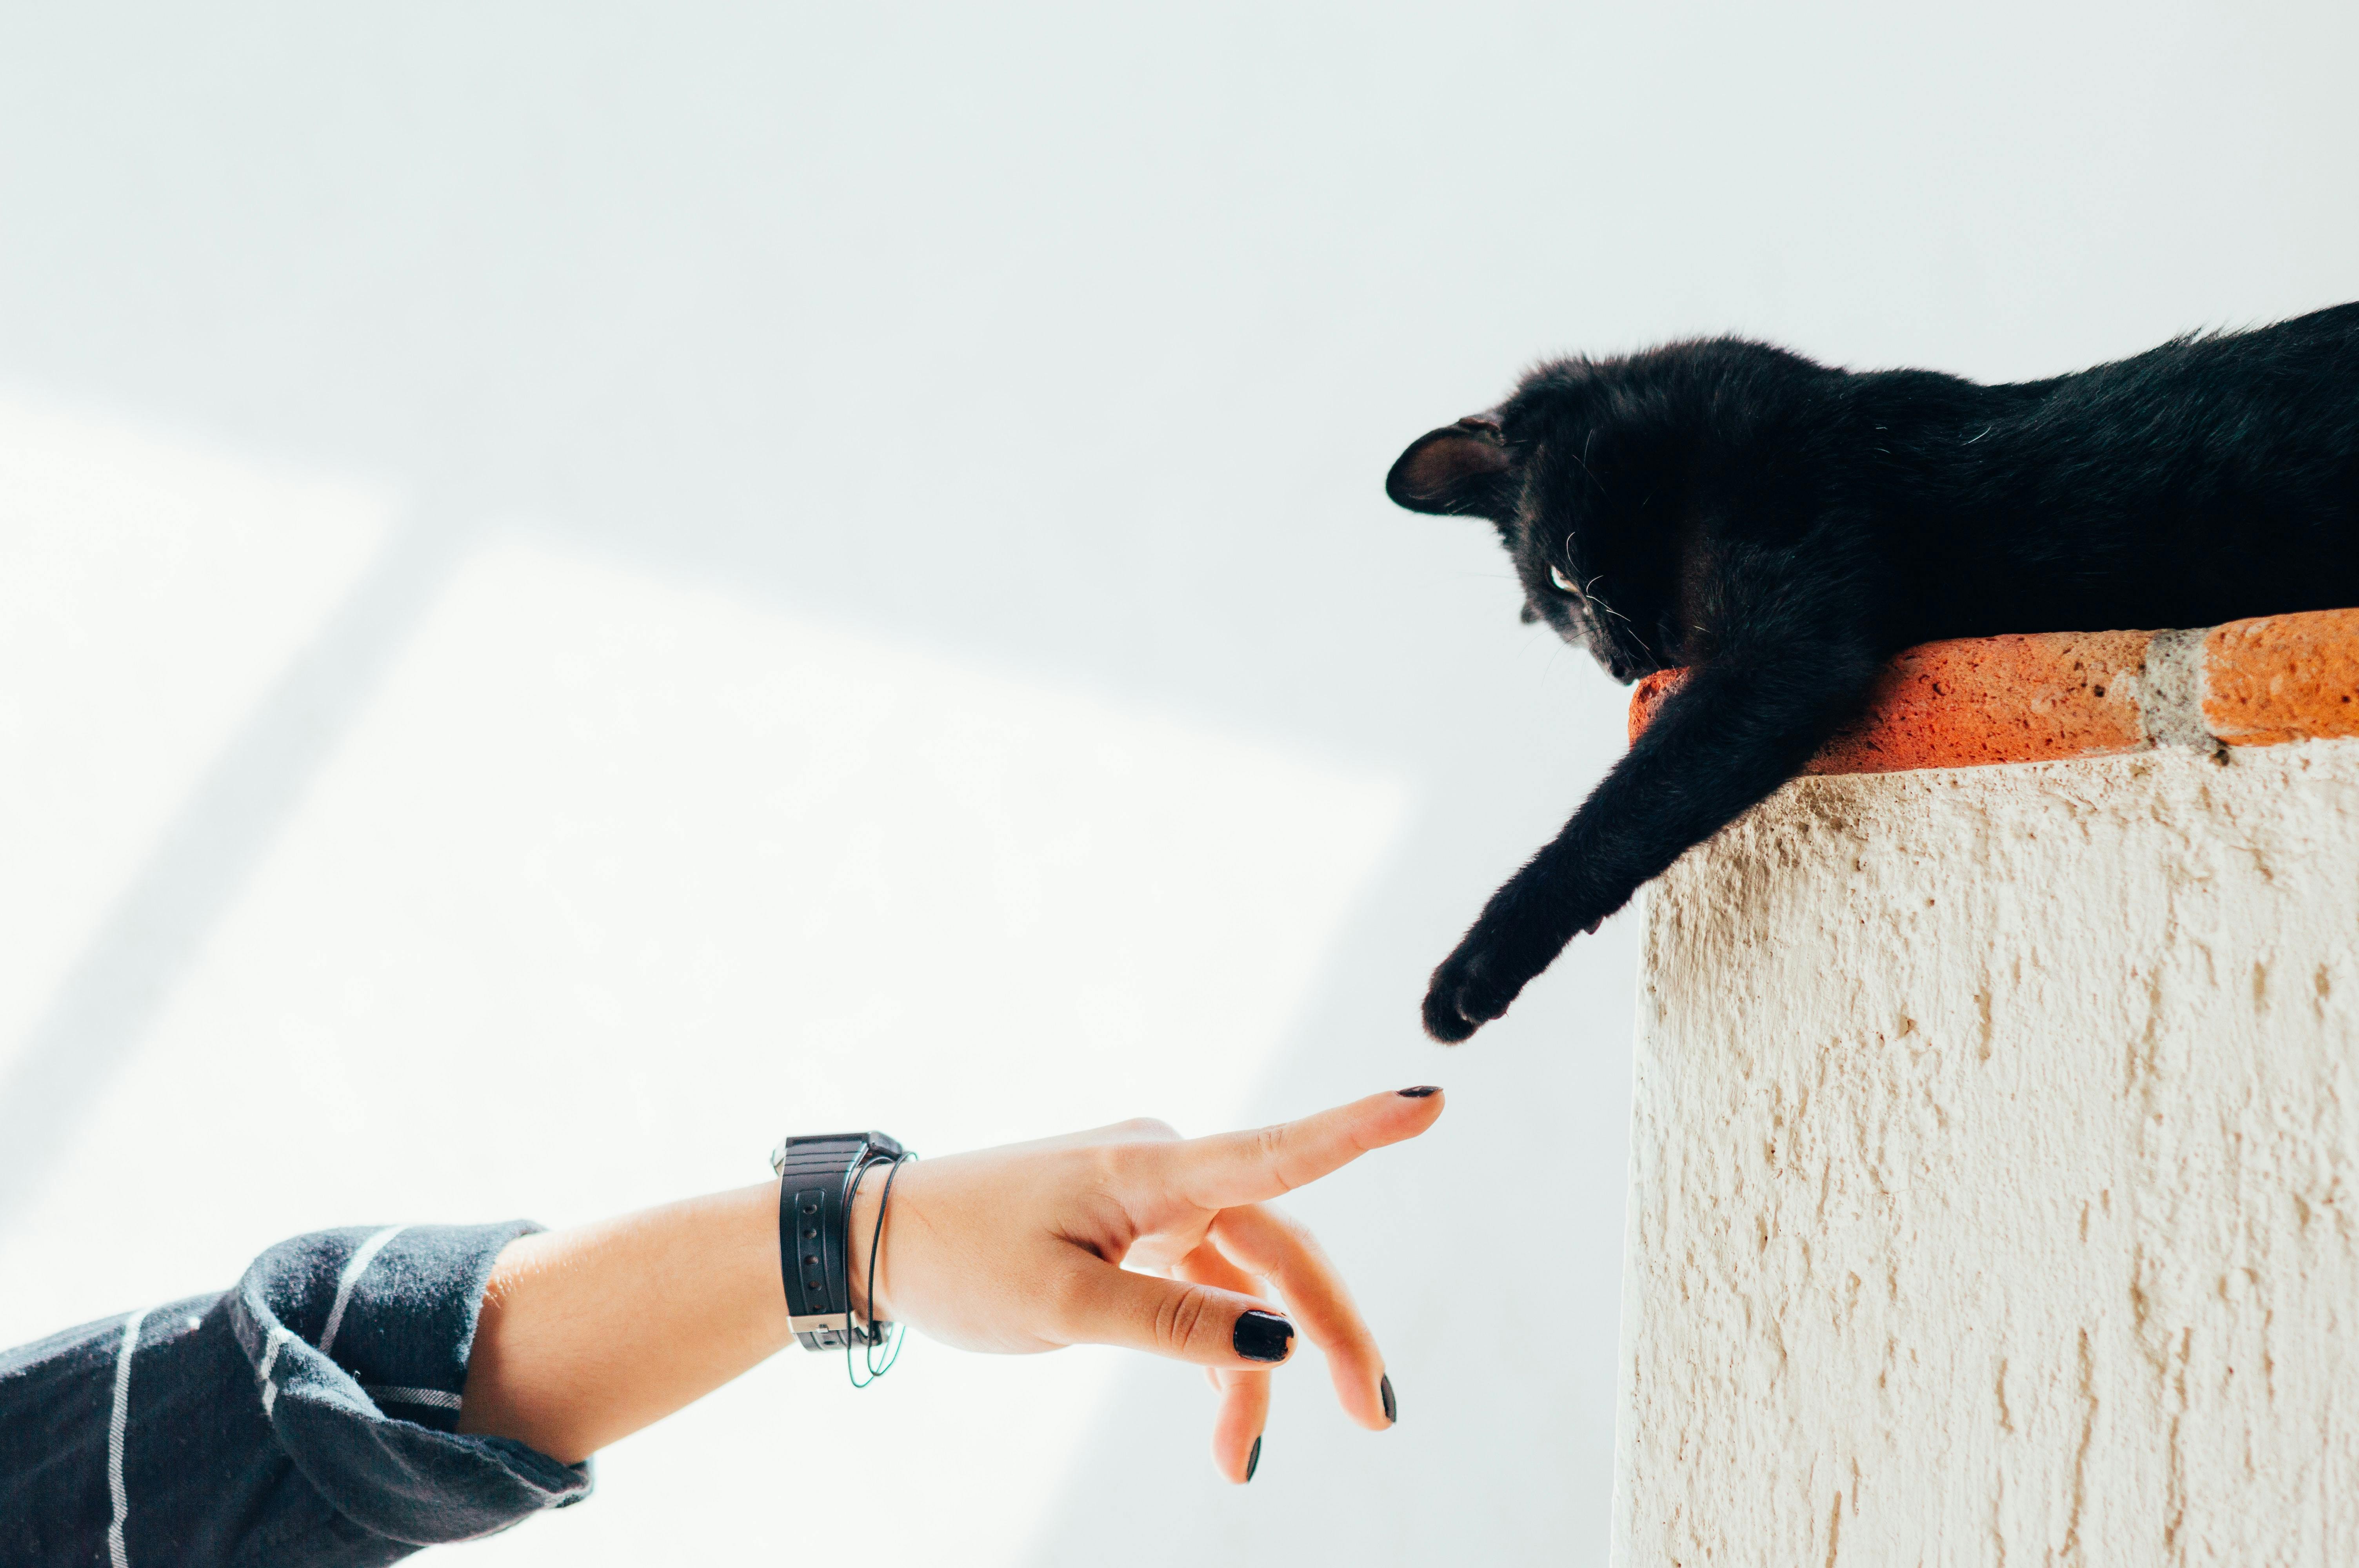 A human and a cat stretching hand to each other